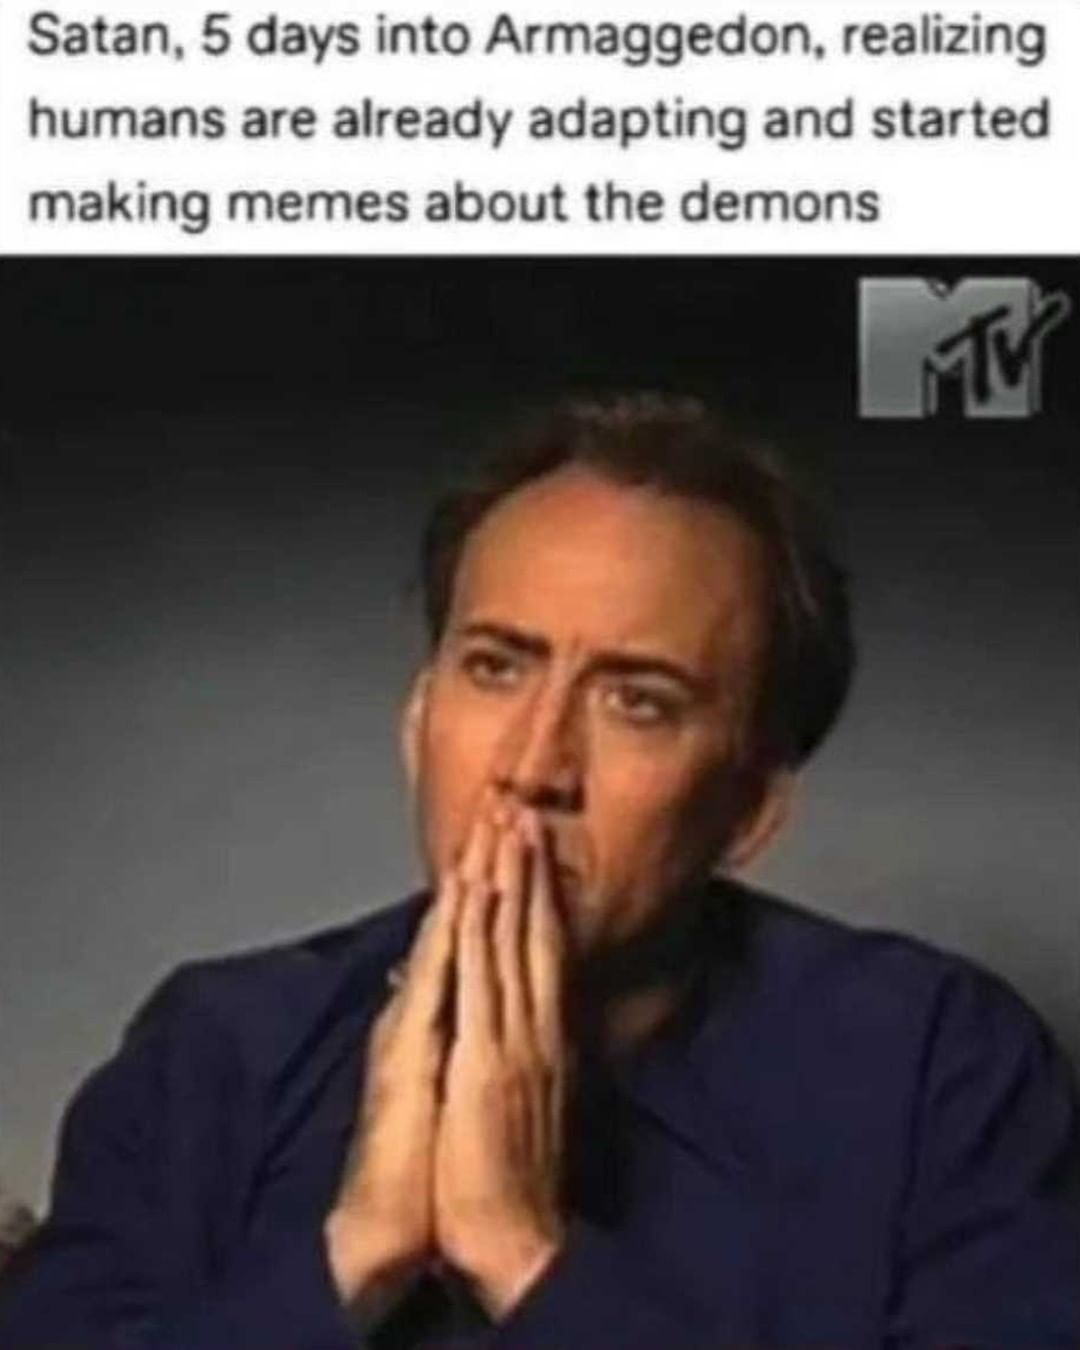 Satan. 5 days into Armaggedon. Realizing humans are already adapting and started making memes about the demons.